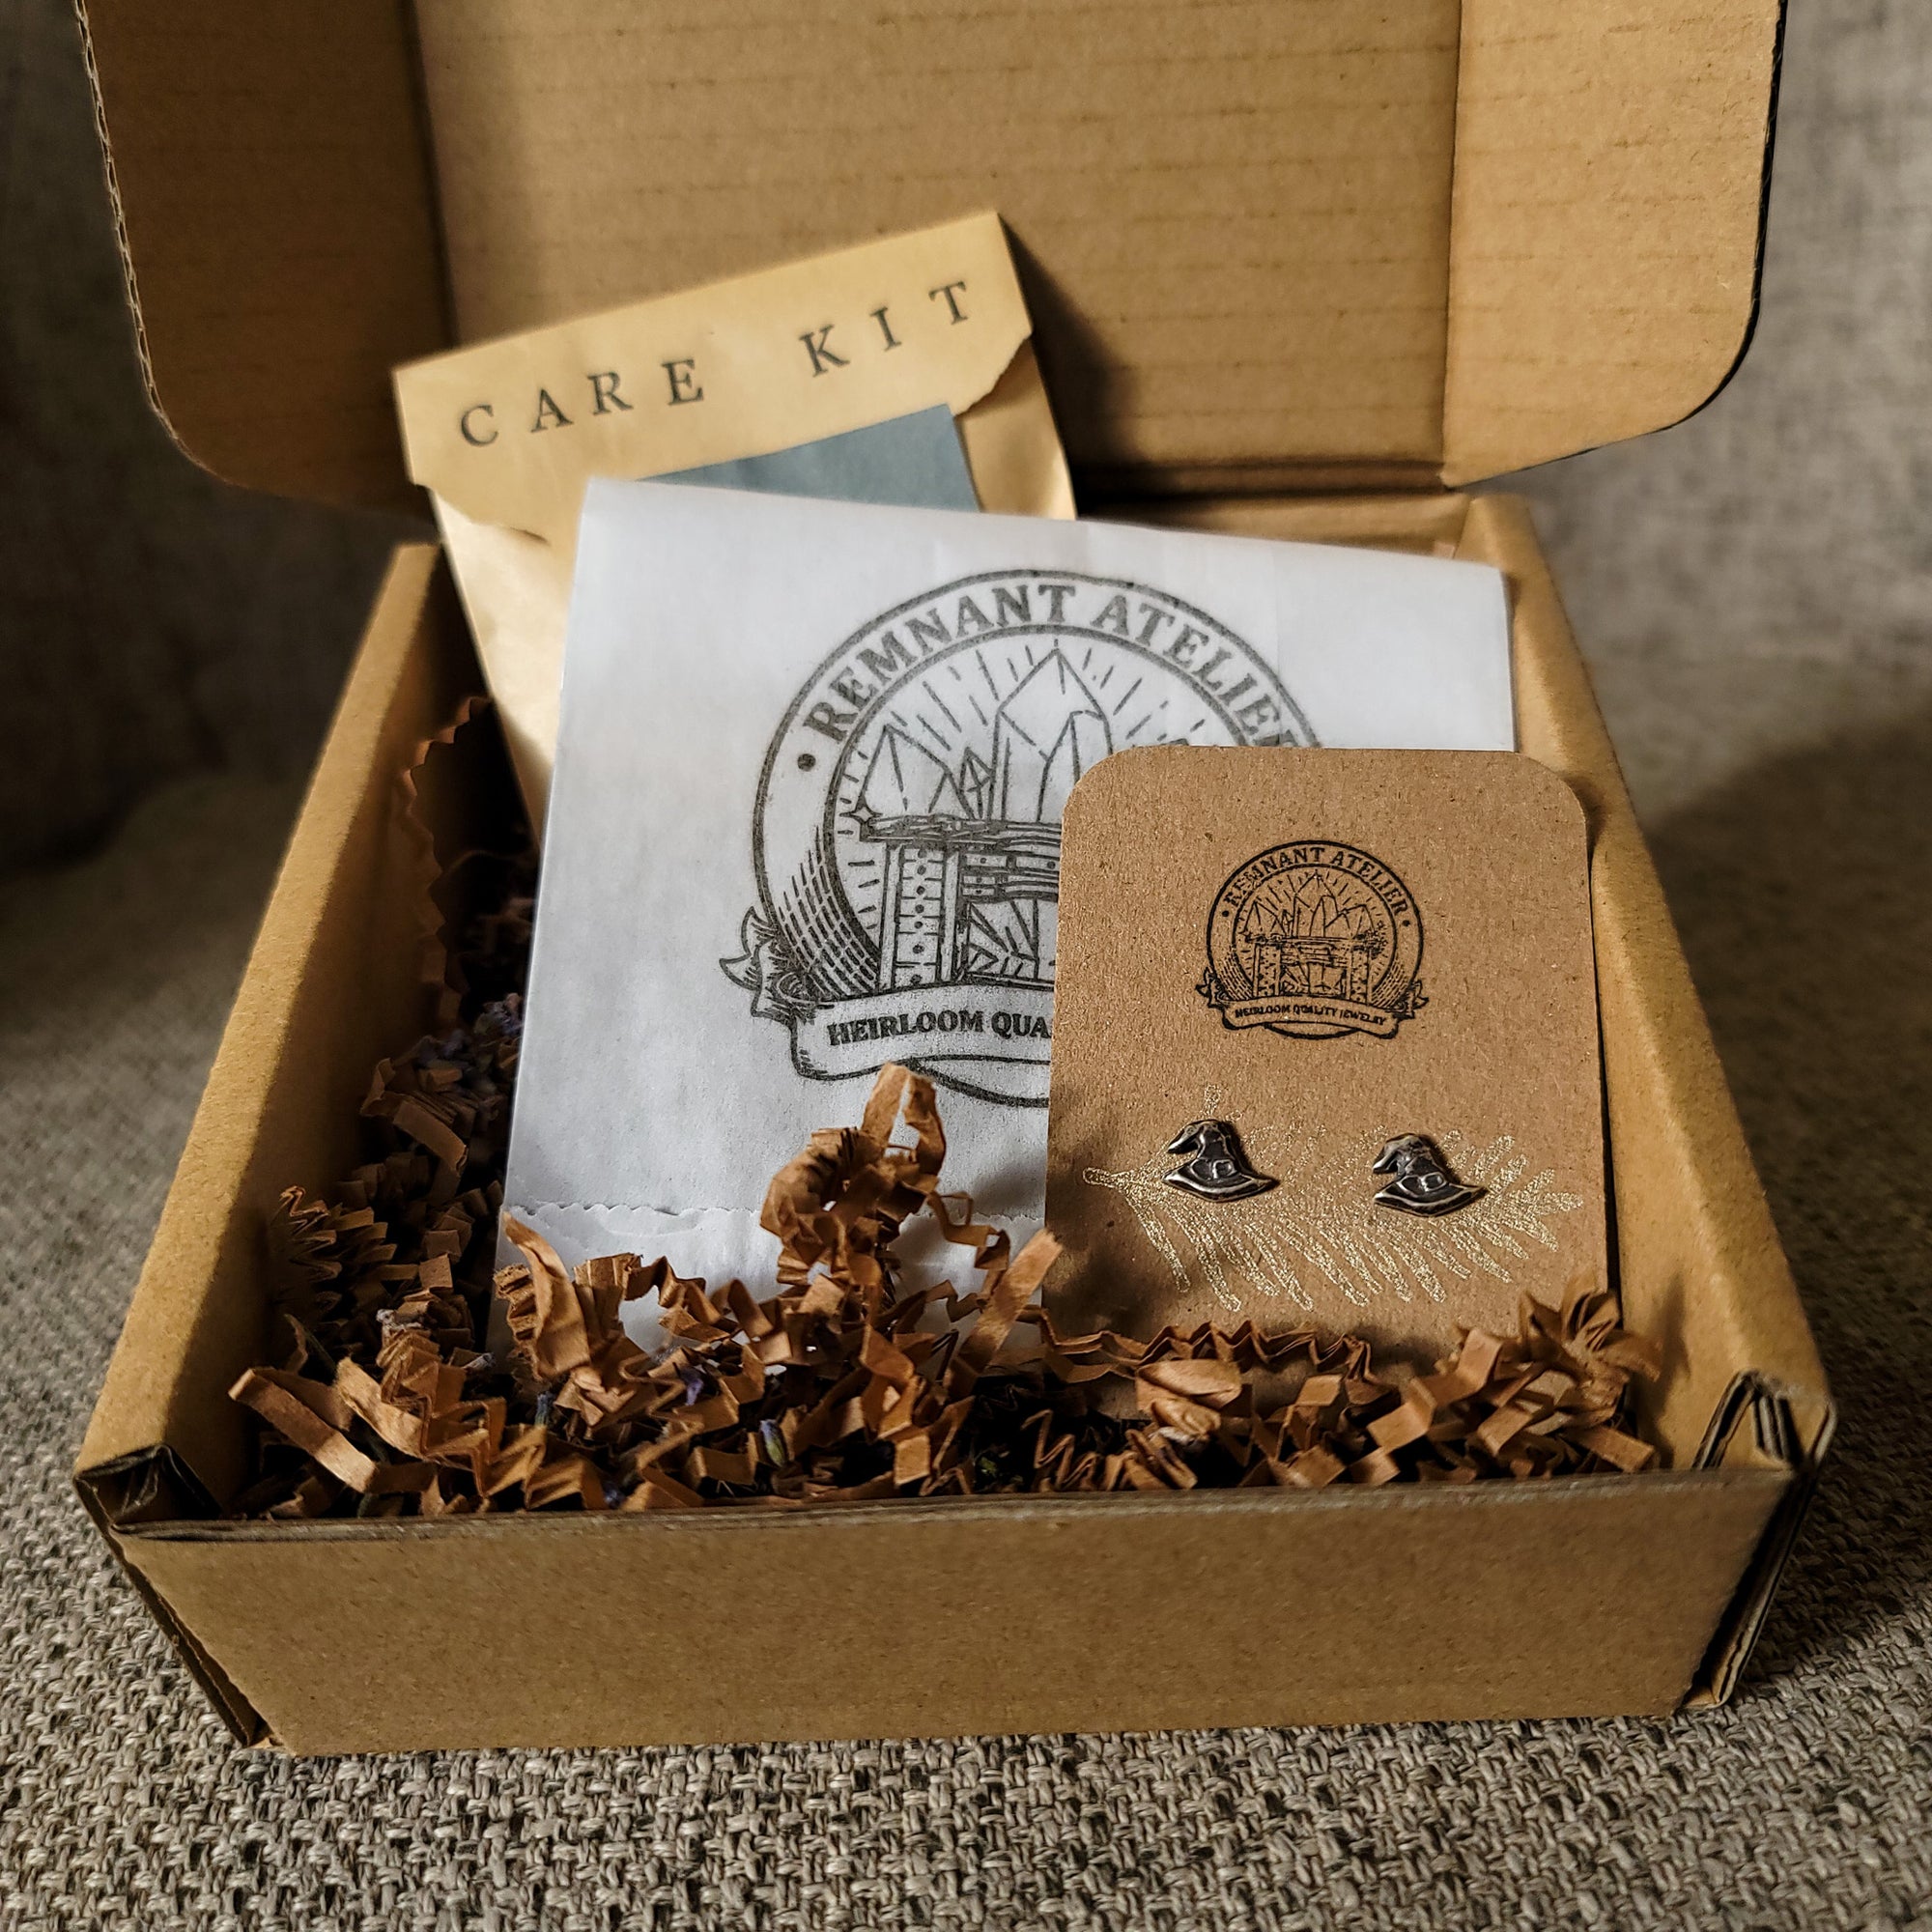 This photo shows a pair of handmade sterling silver witch hat shaped stud earrings displayed on a cardboard earring card inside a box, surrounded by shredded cardboard. The package also includes a care kit to keep the jewelry in top condition